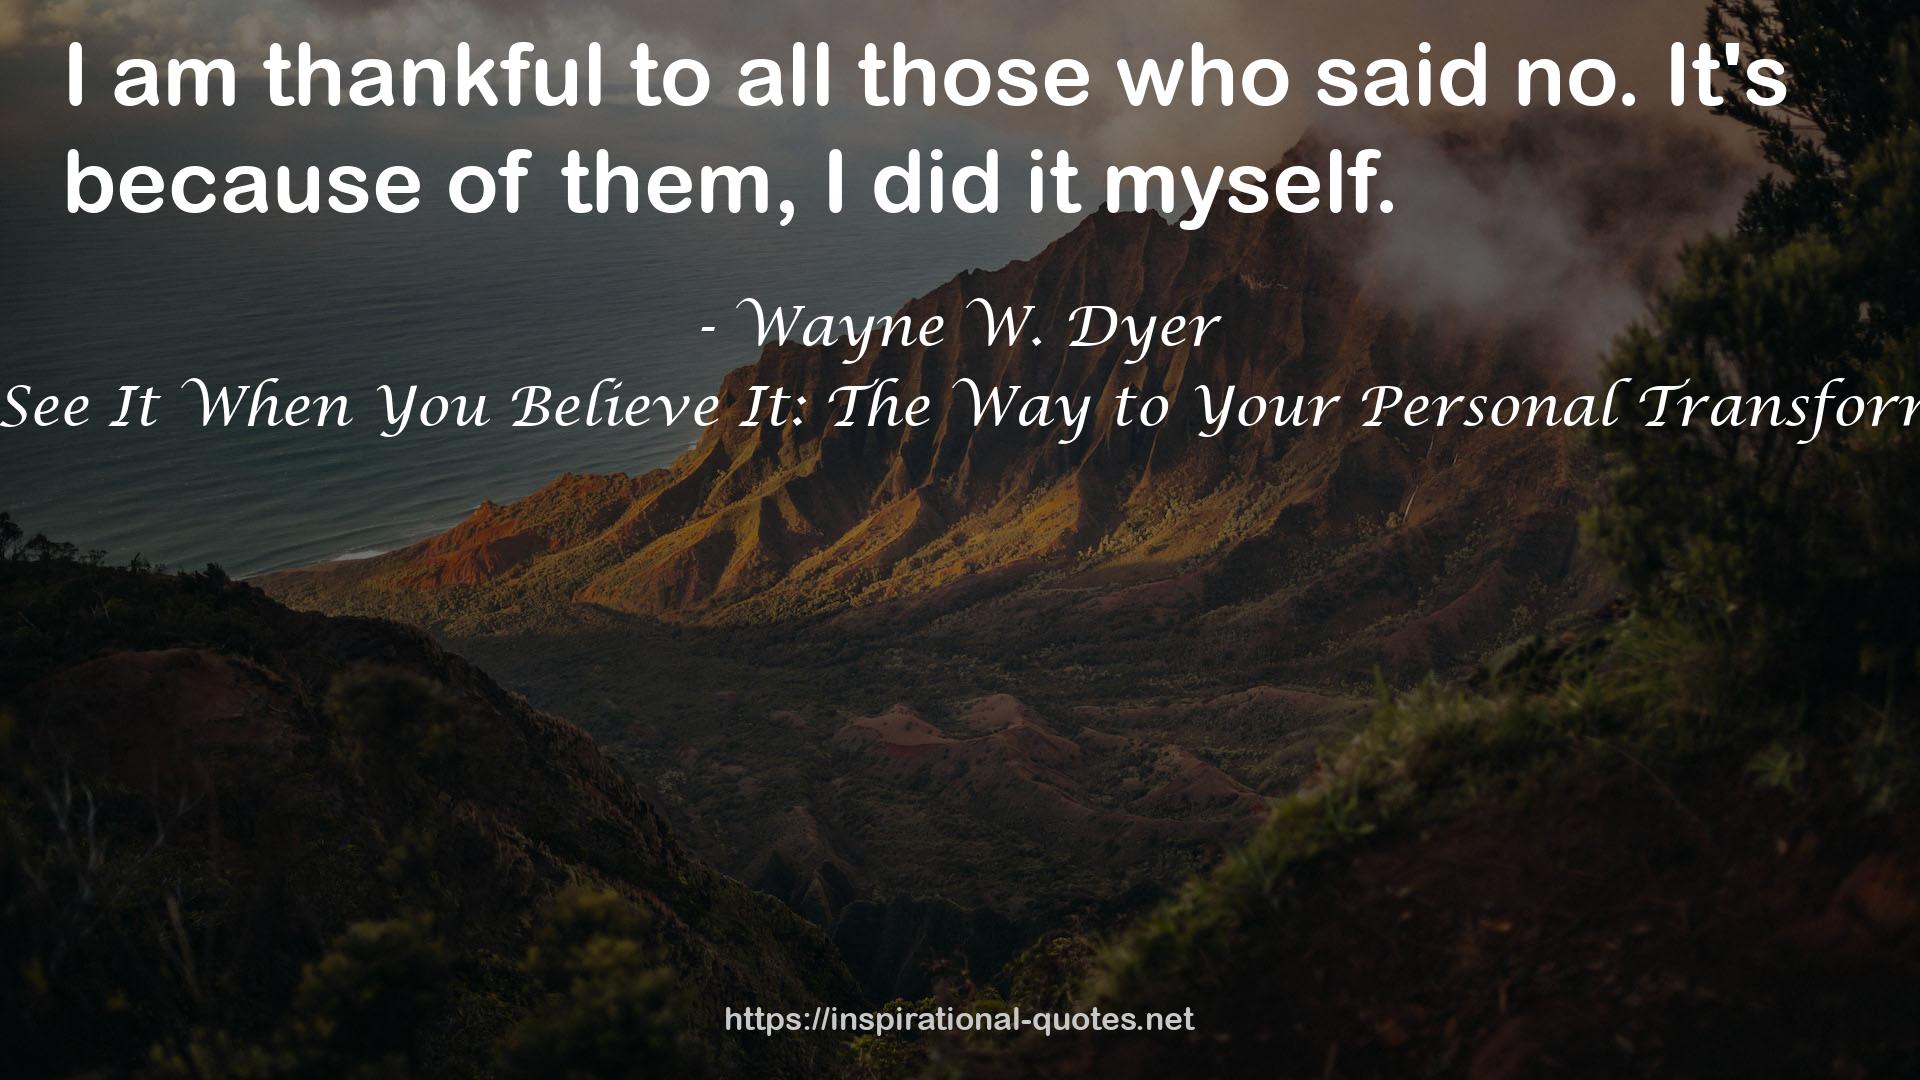 You'll See It When You Believe It: The Way to Your Personal Transformation QUOTES